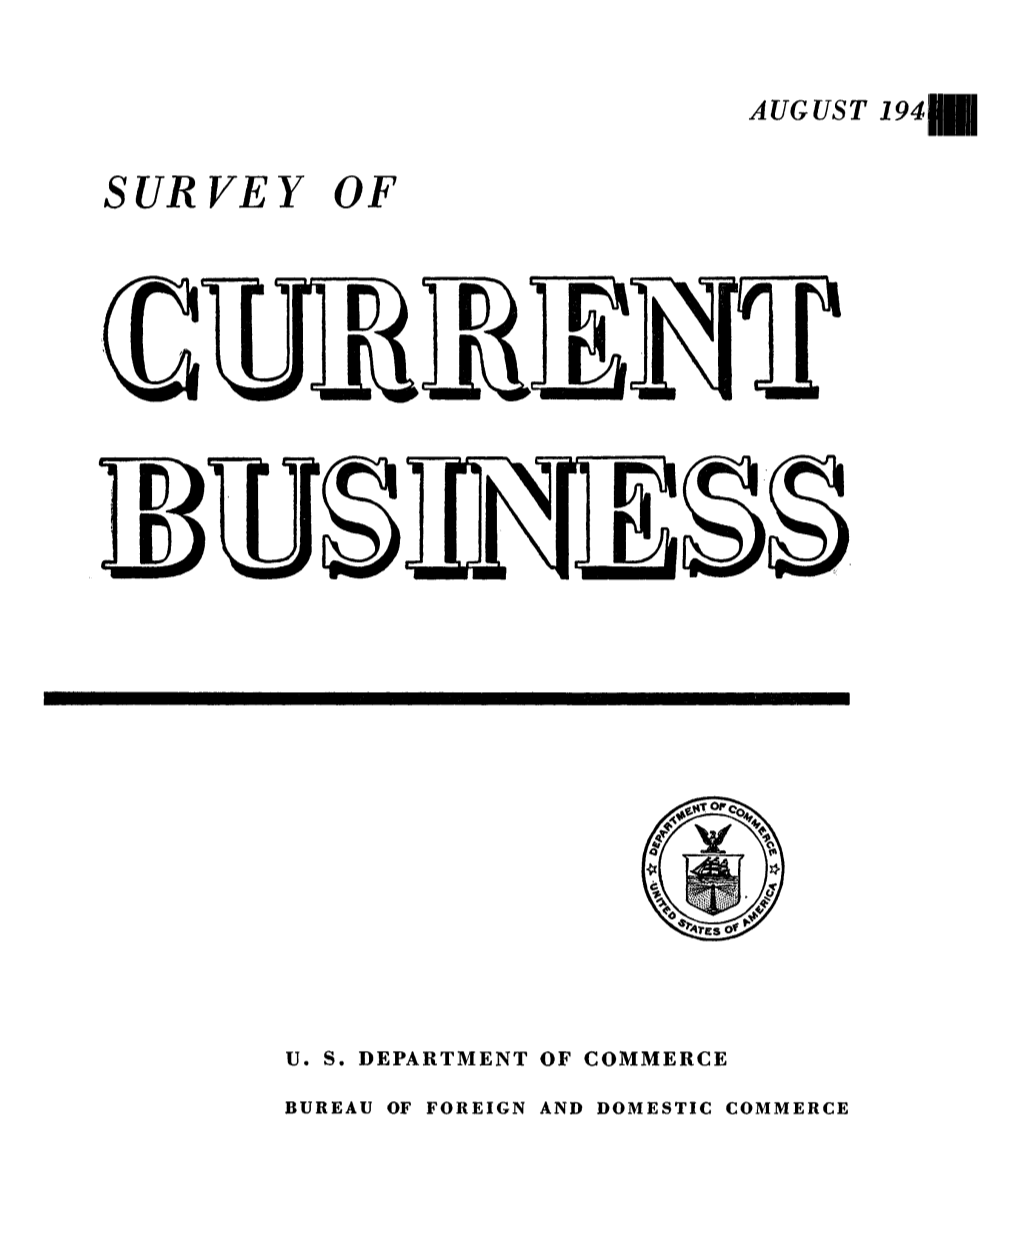 SURVEY of CURRENT BUSINESS August 1948